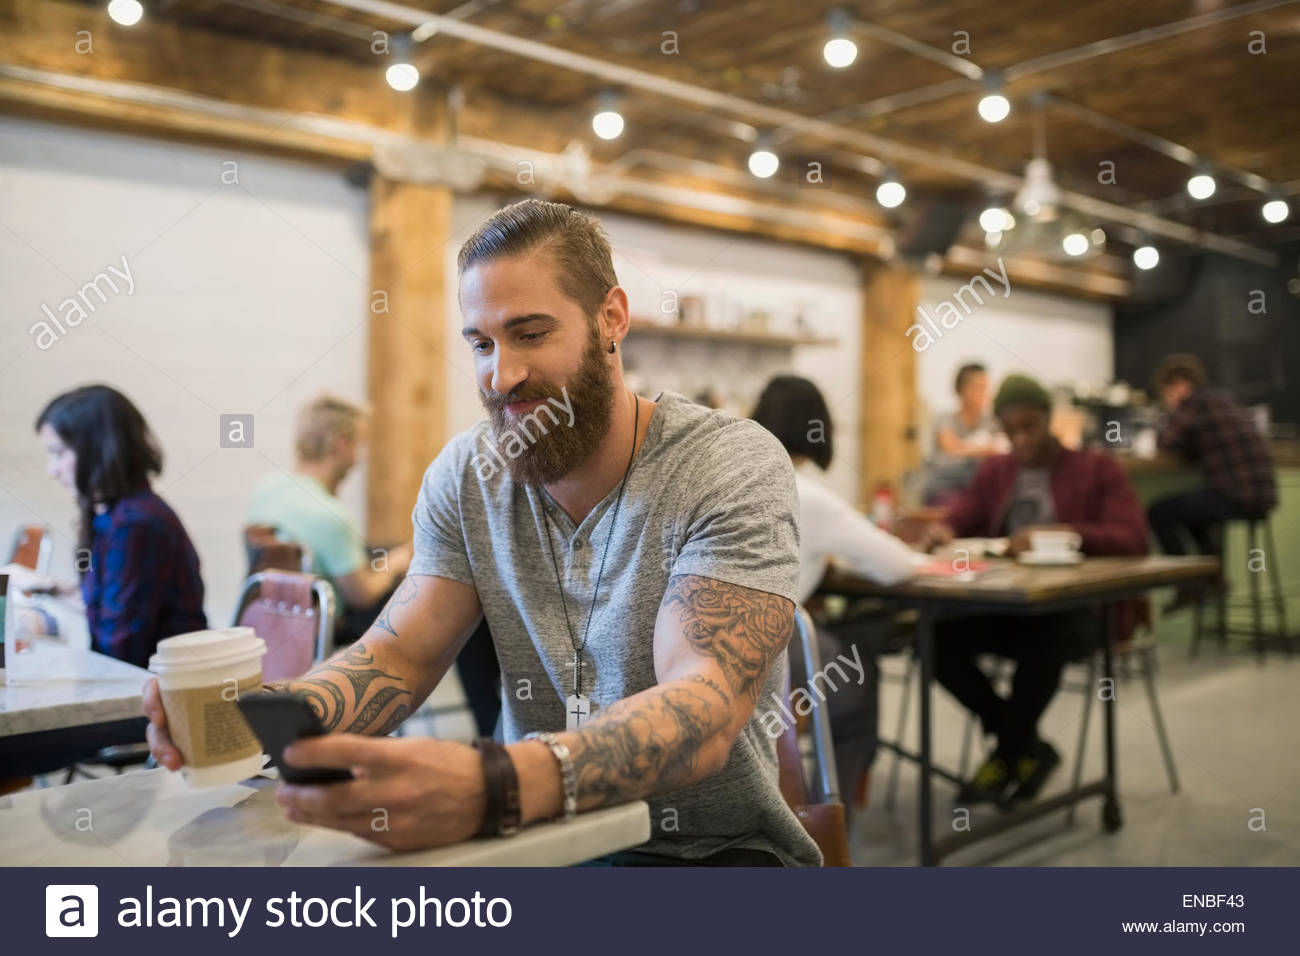 Bearded man with tattoos drinking coffee in cafe Stock Photo